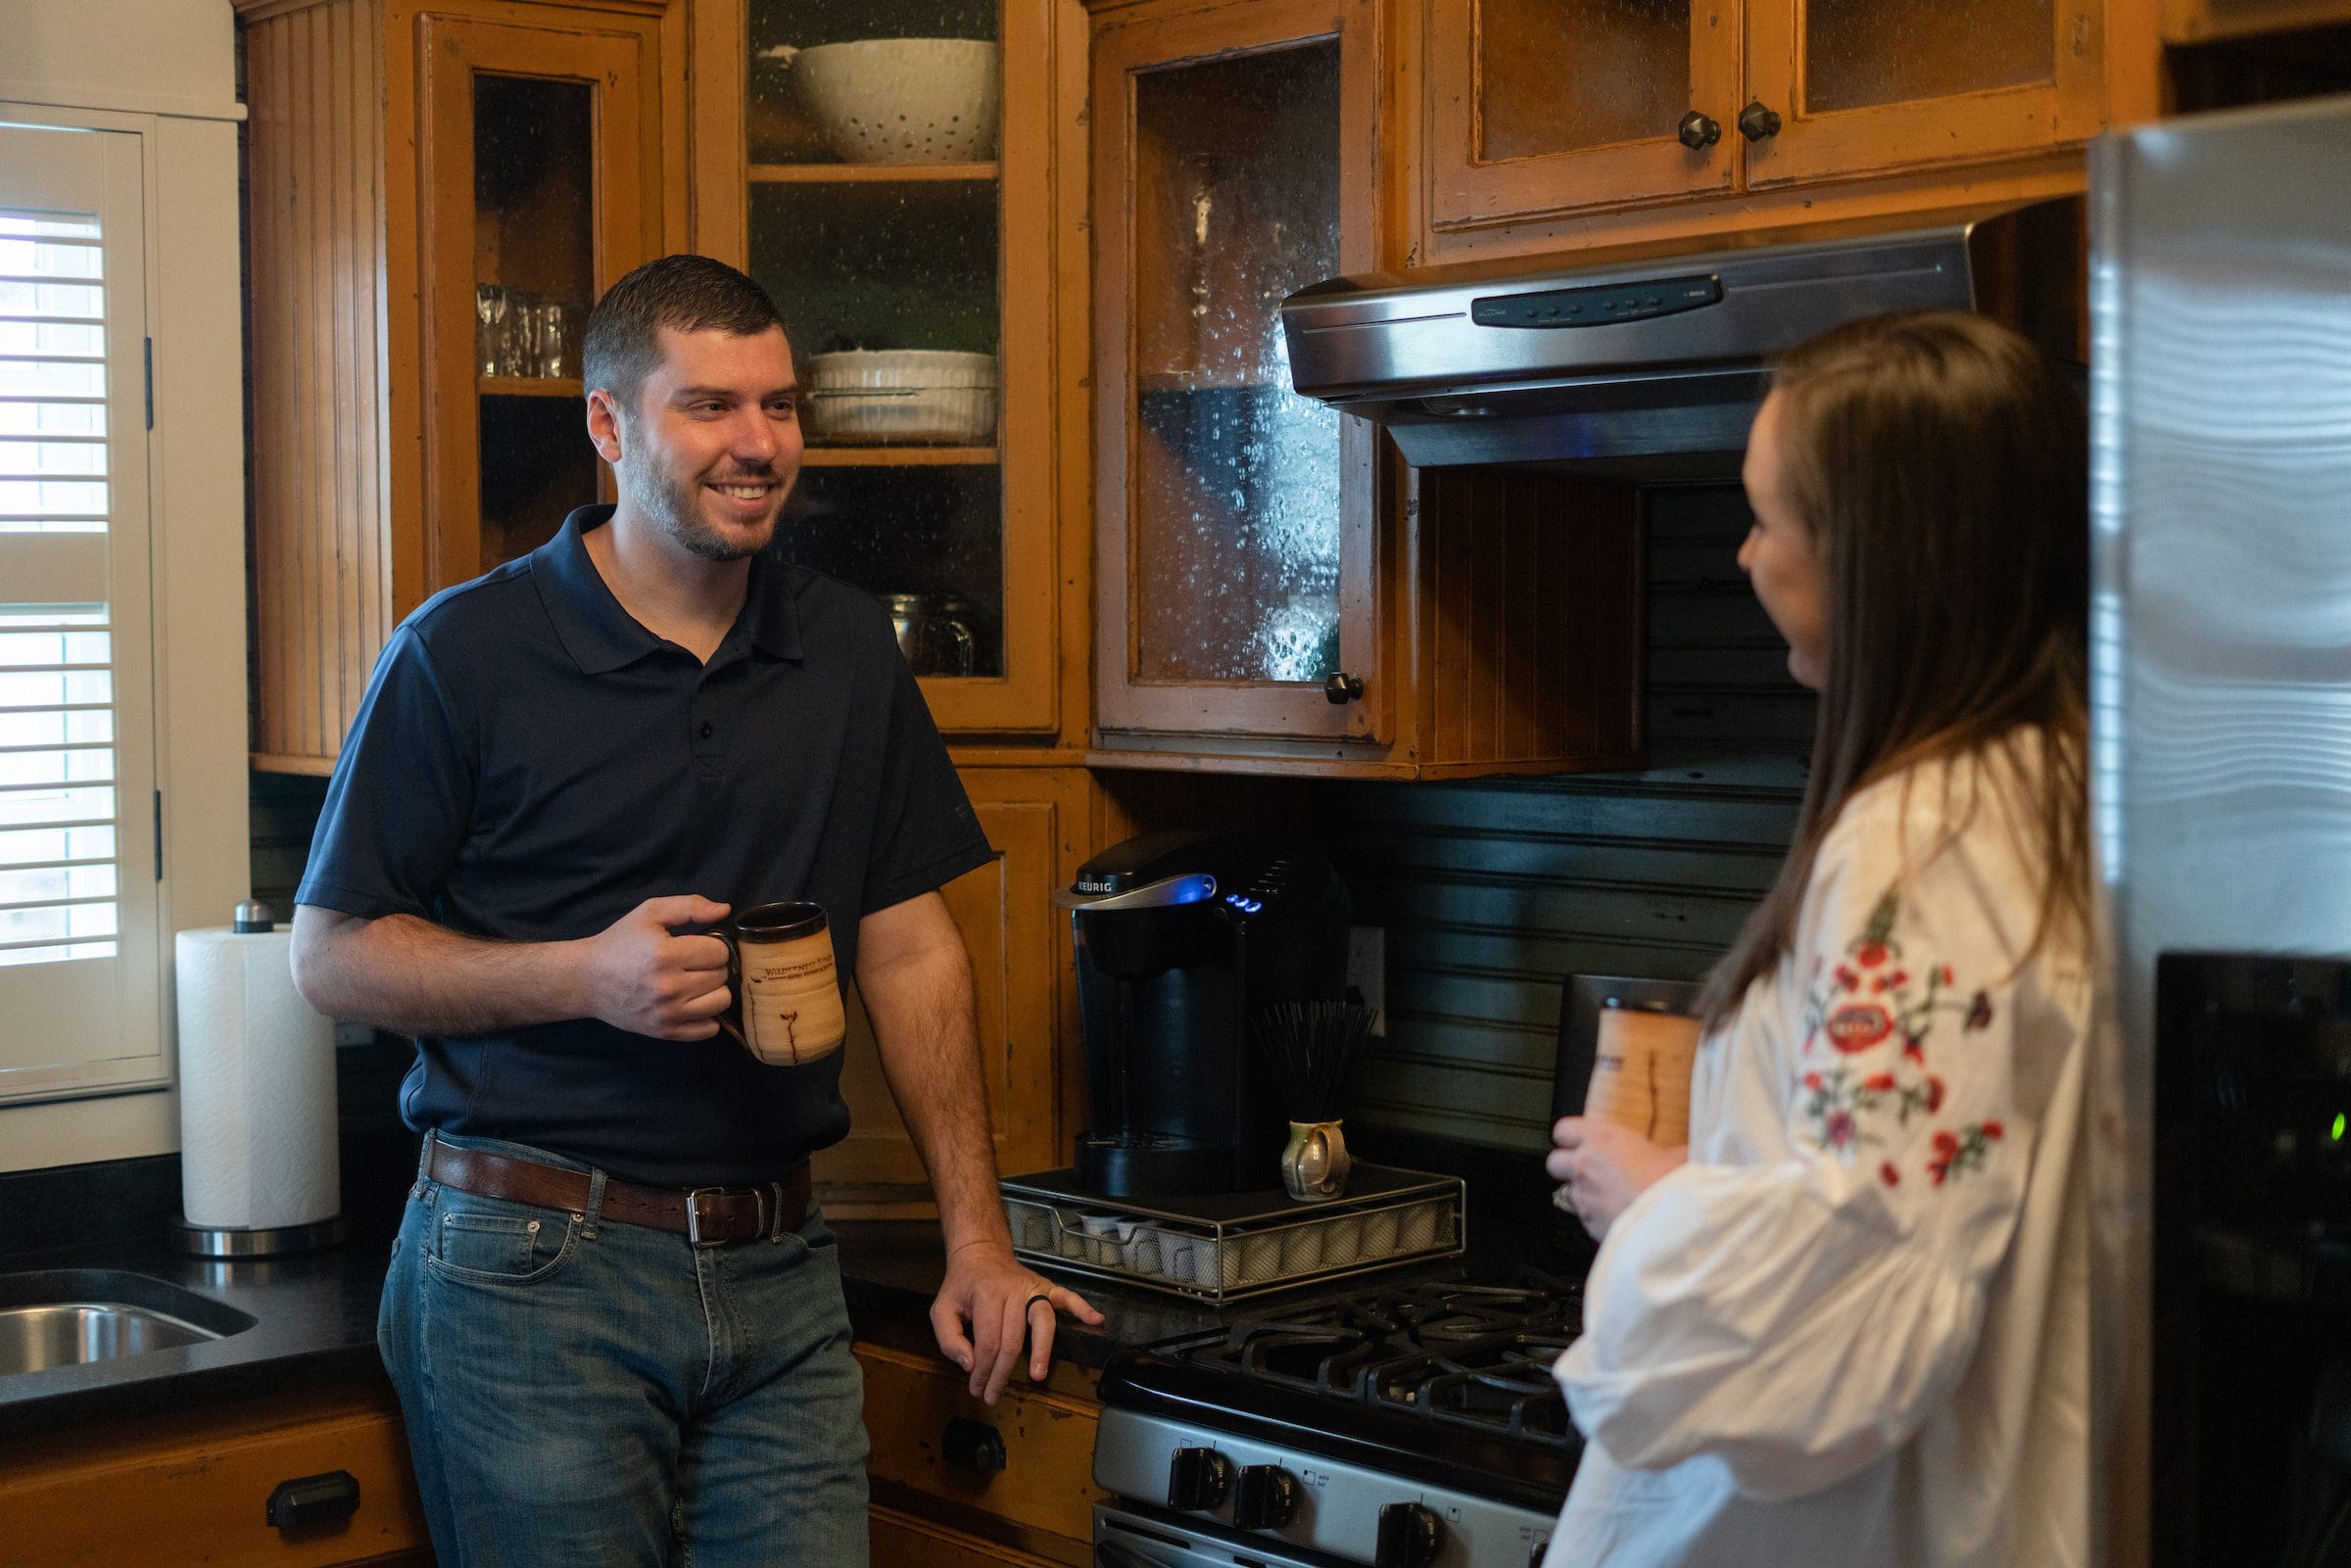 Couple sharing coffee in kitchen